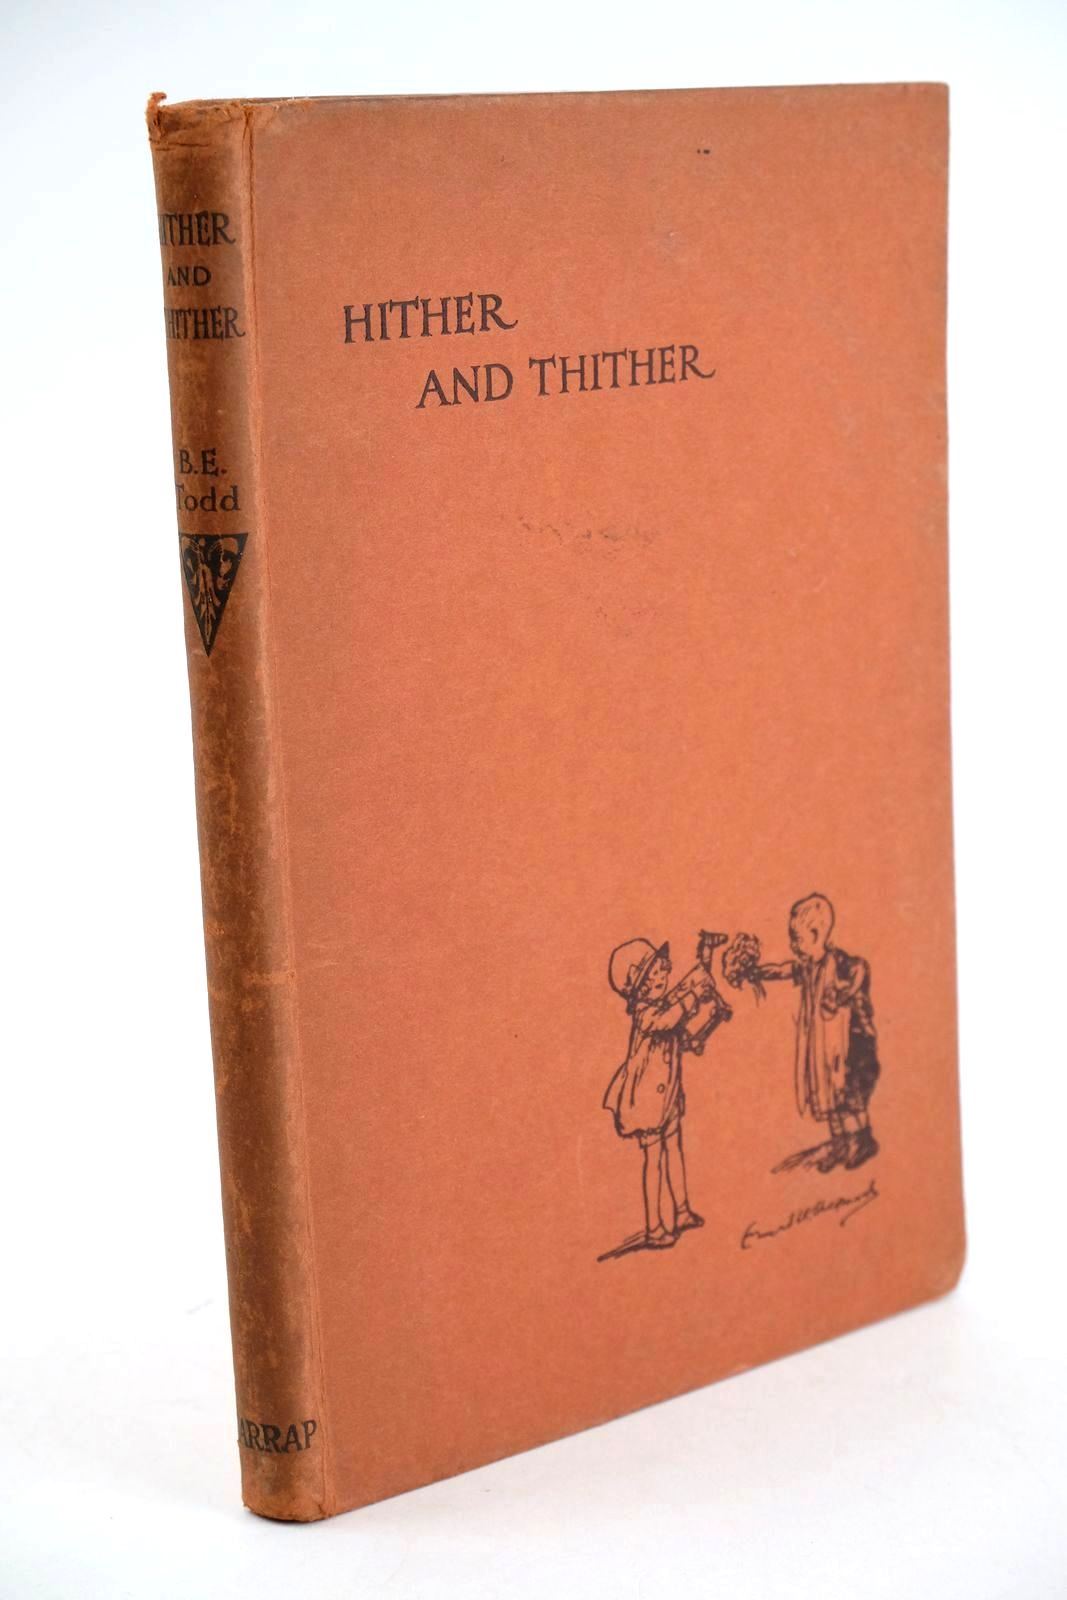 Photo of HITHER AND THITHER written by Todd, Barbara Euphan illustrated by Tarrant, Margaret Shepard, E.H. published by George G. Harrap &amp; Co. Ltd. (STOCK CODE: 1324075)  for sale by Stella & Rose's Books